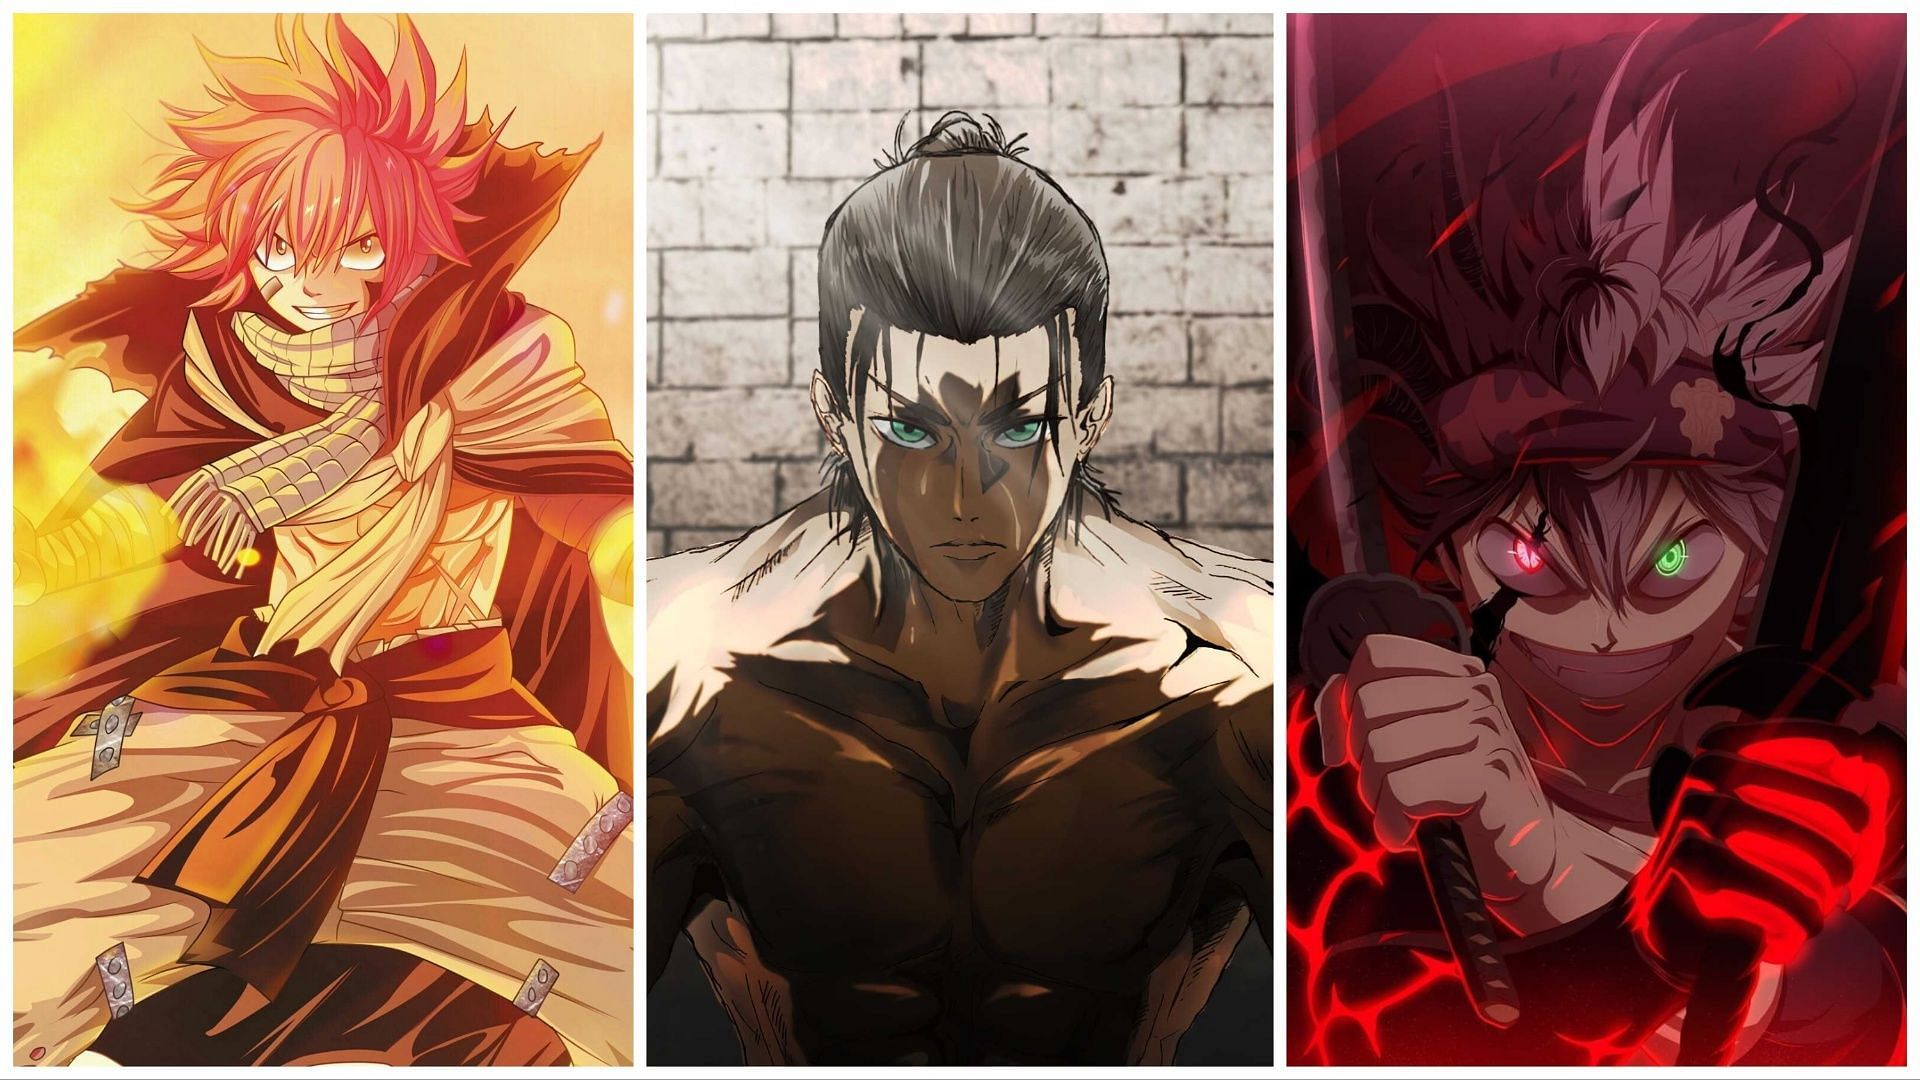 10 Best Anime With Adult Protagonists According To Ranker